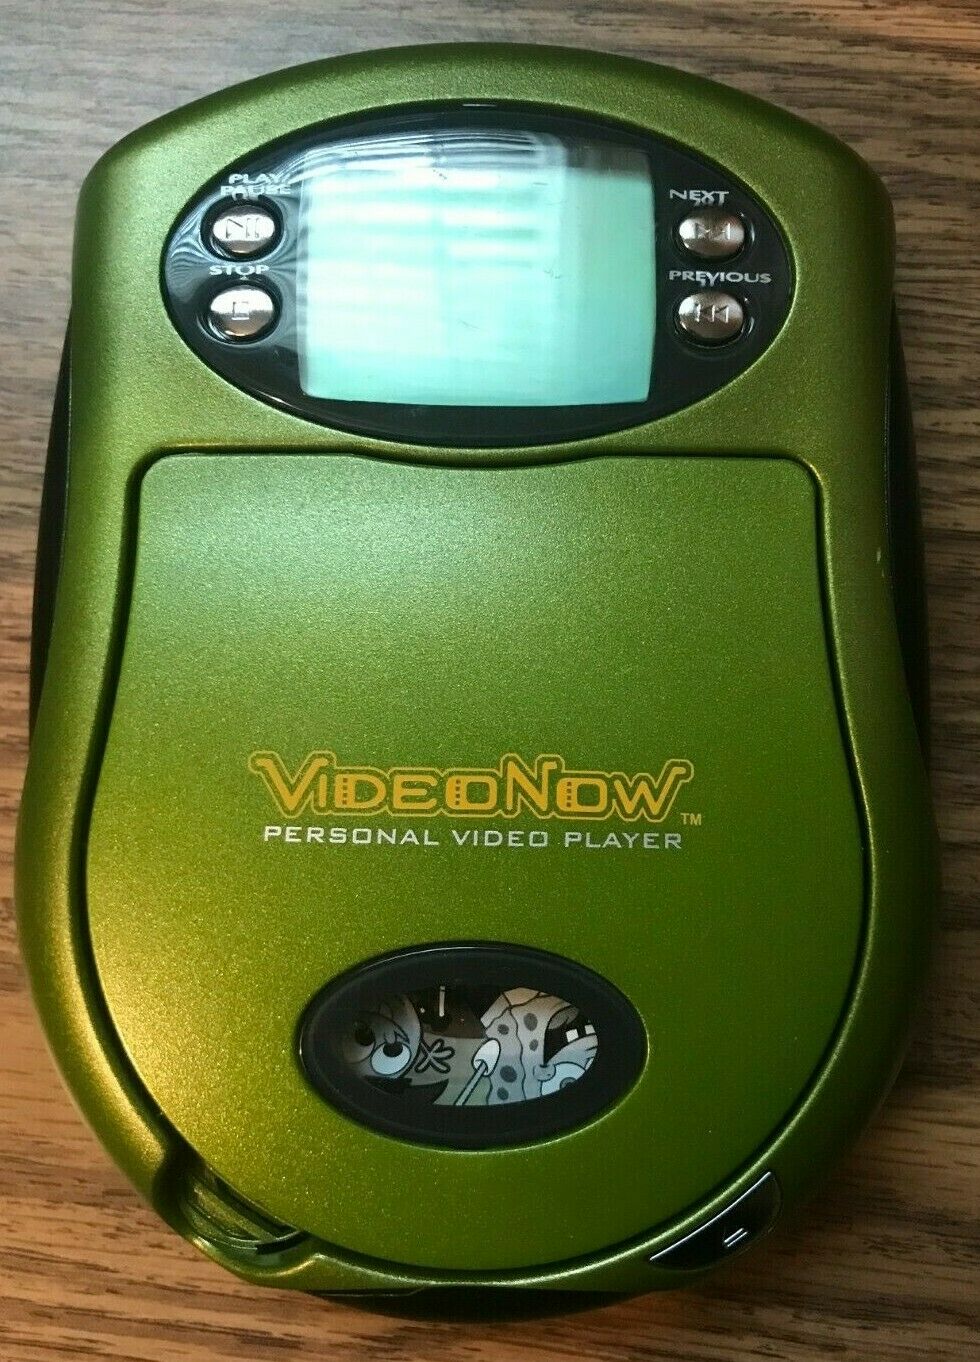 Vintage 2003 Video Now Personal Video Player Hasbro Green Portable Video Player